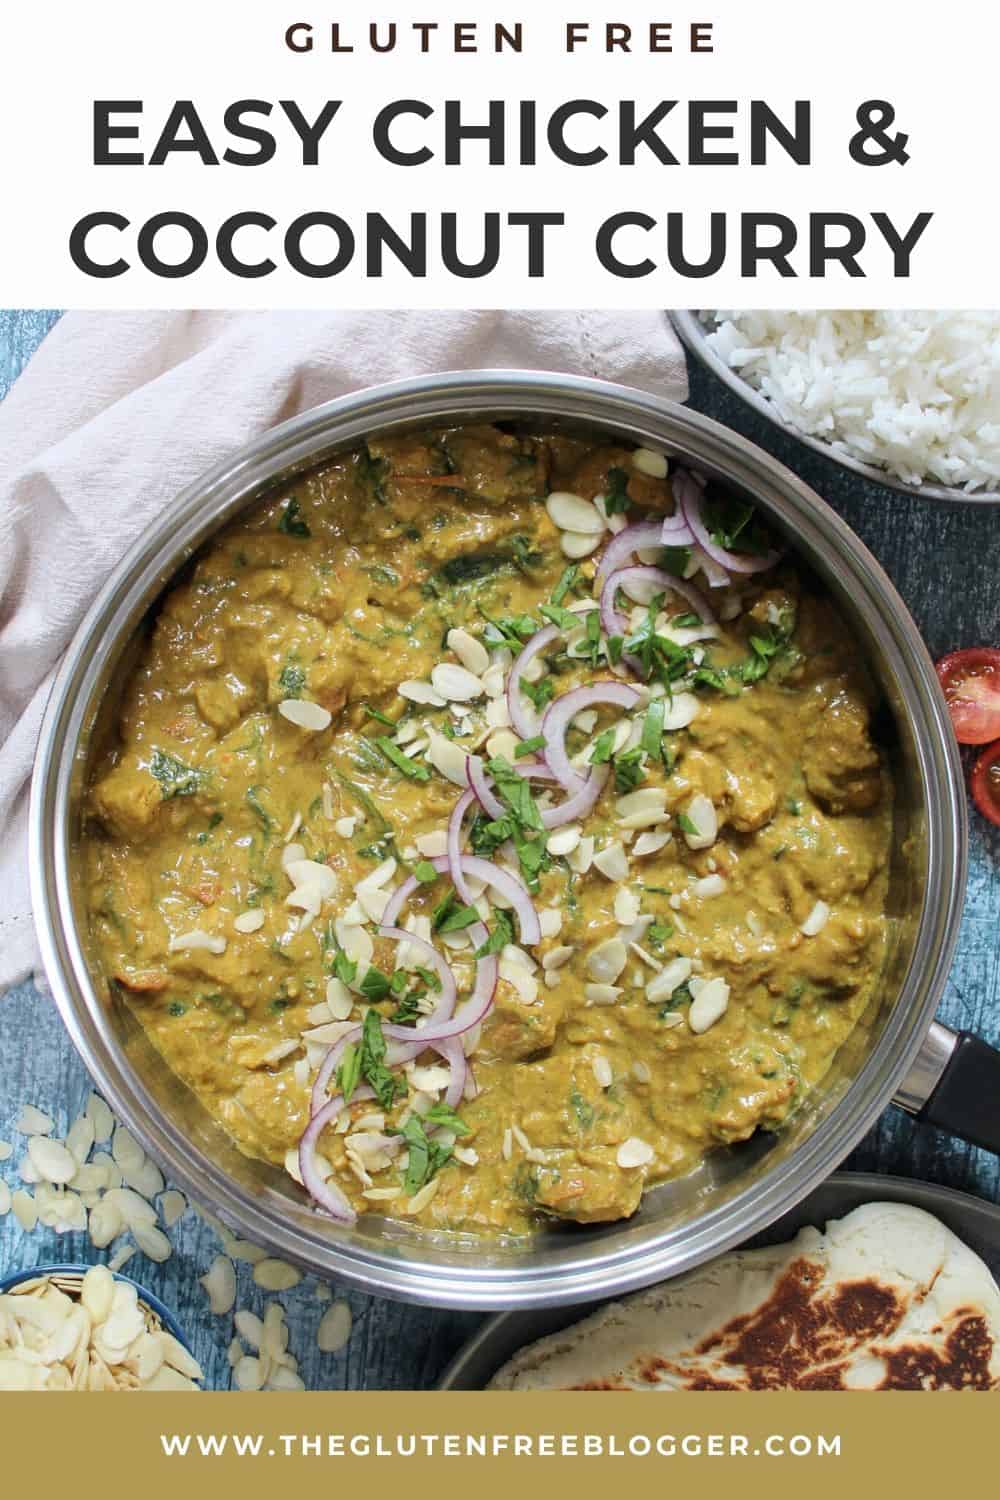 EASY GLUTEN FREE CHICKEN CURRY WITH COCONUT - DAIRY FREE OPTION, SUPER ...